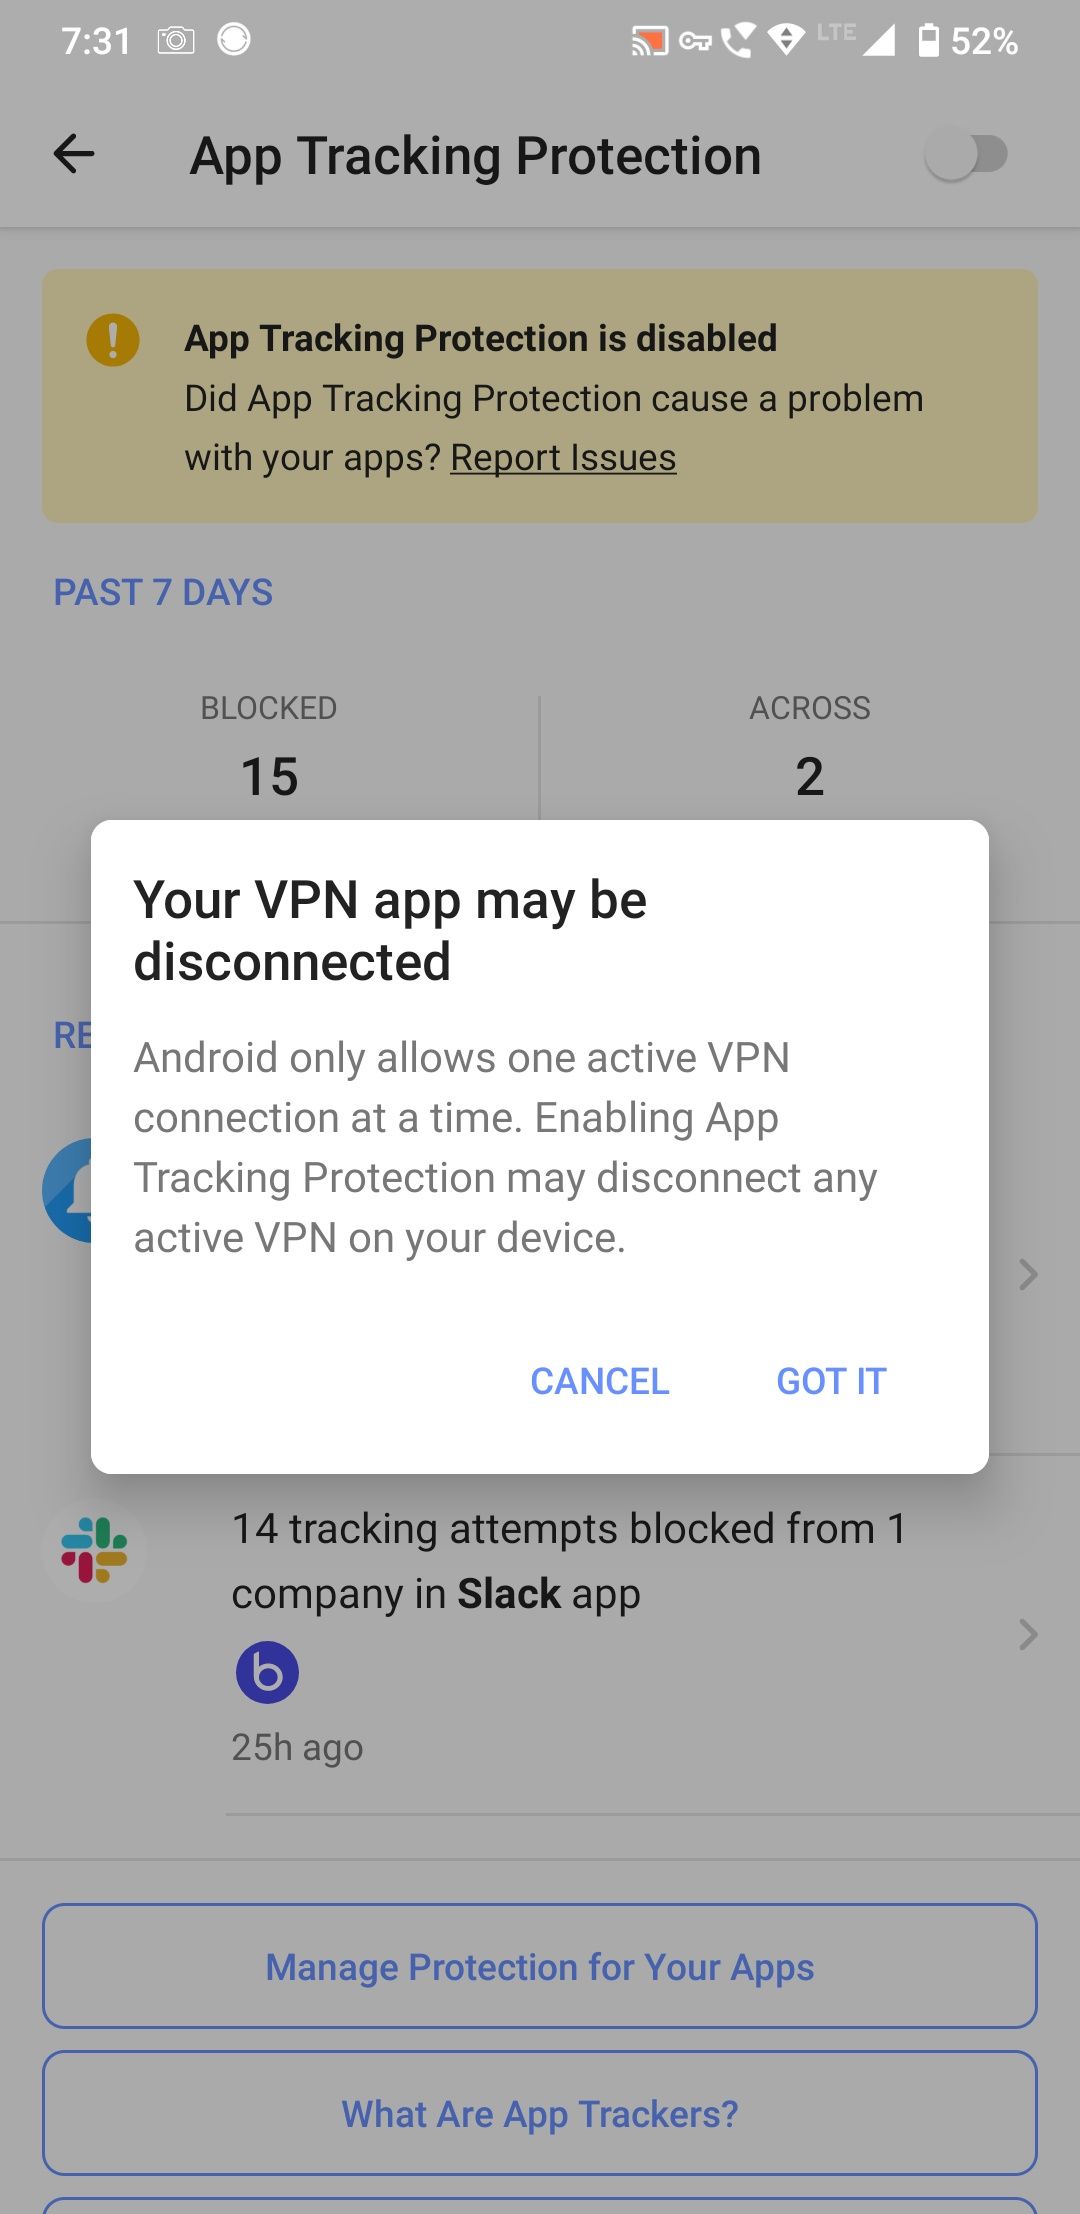 android limits to only one VPN connection at a time